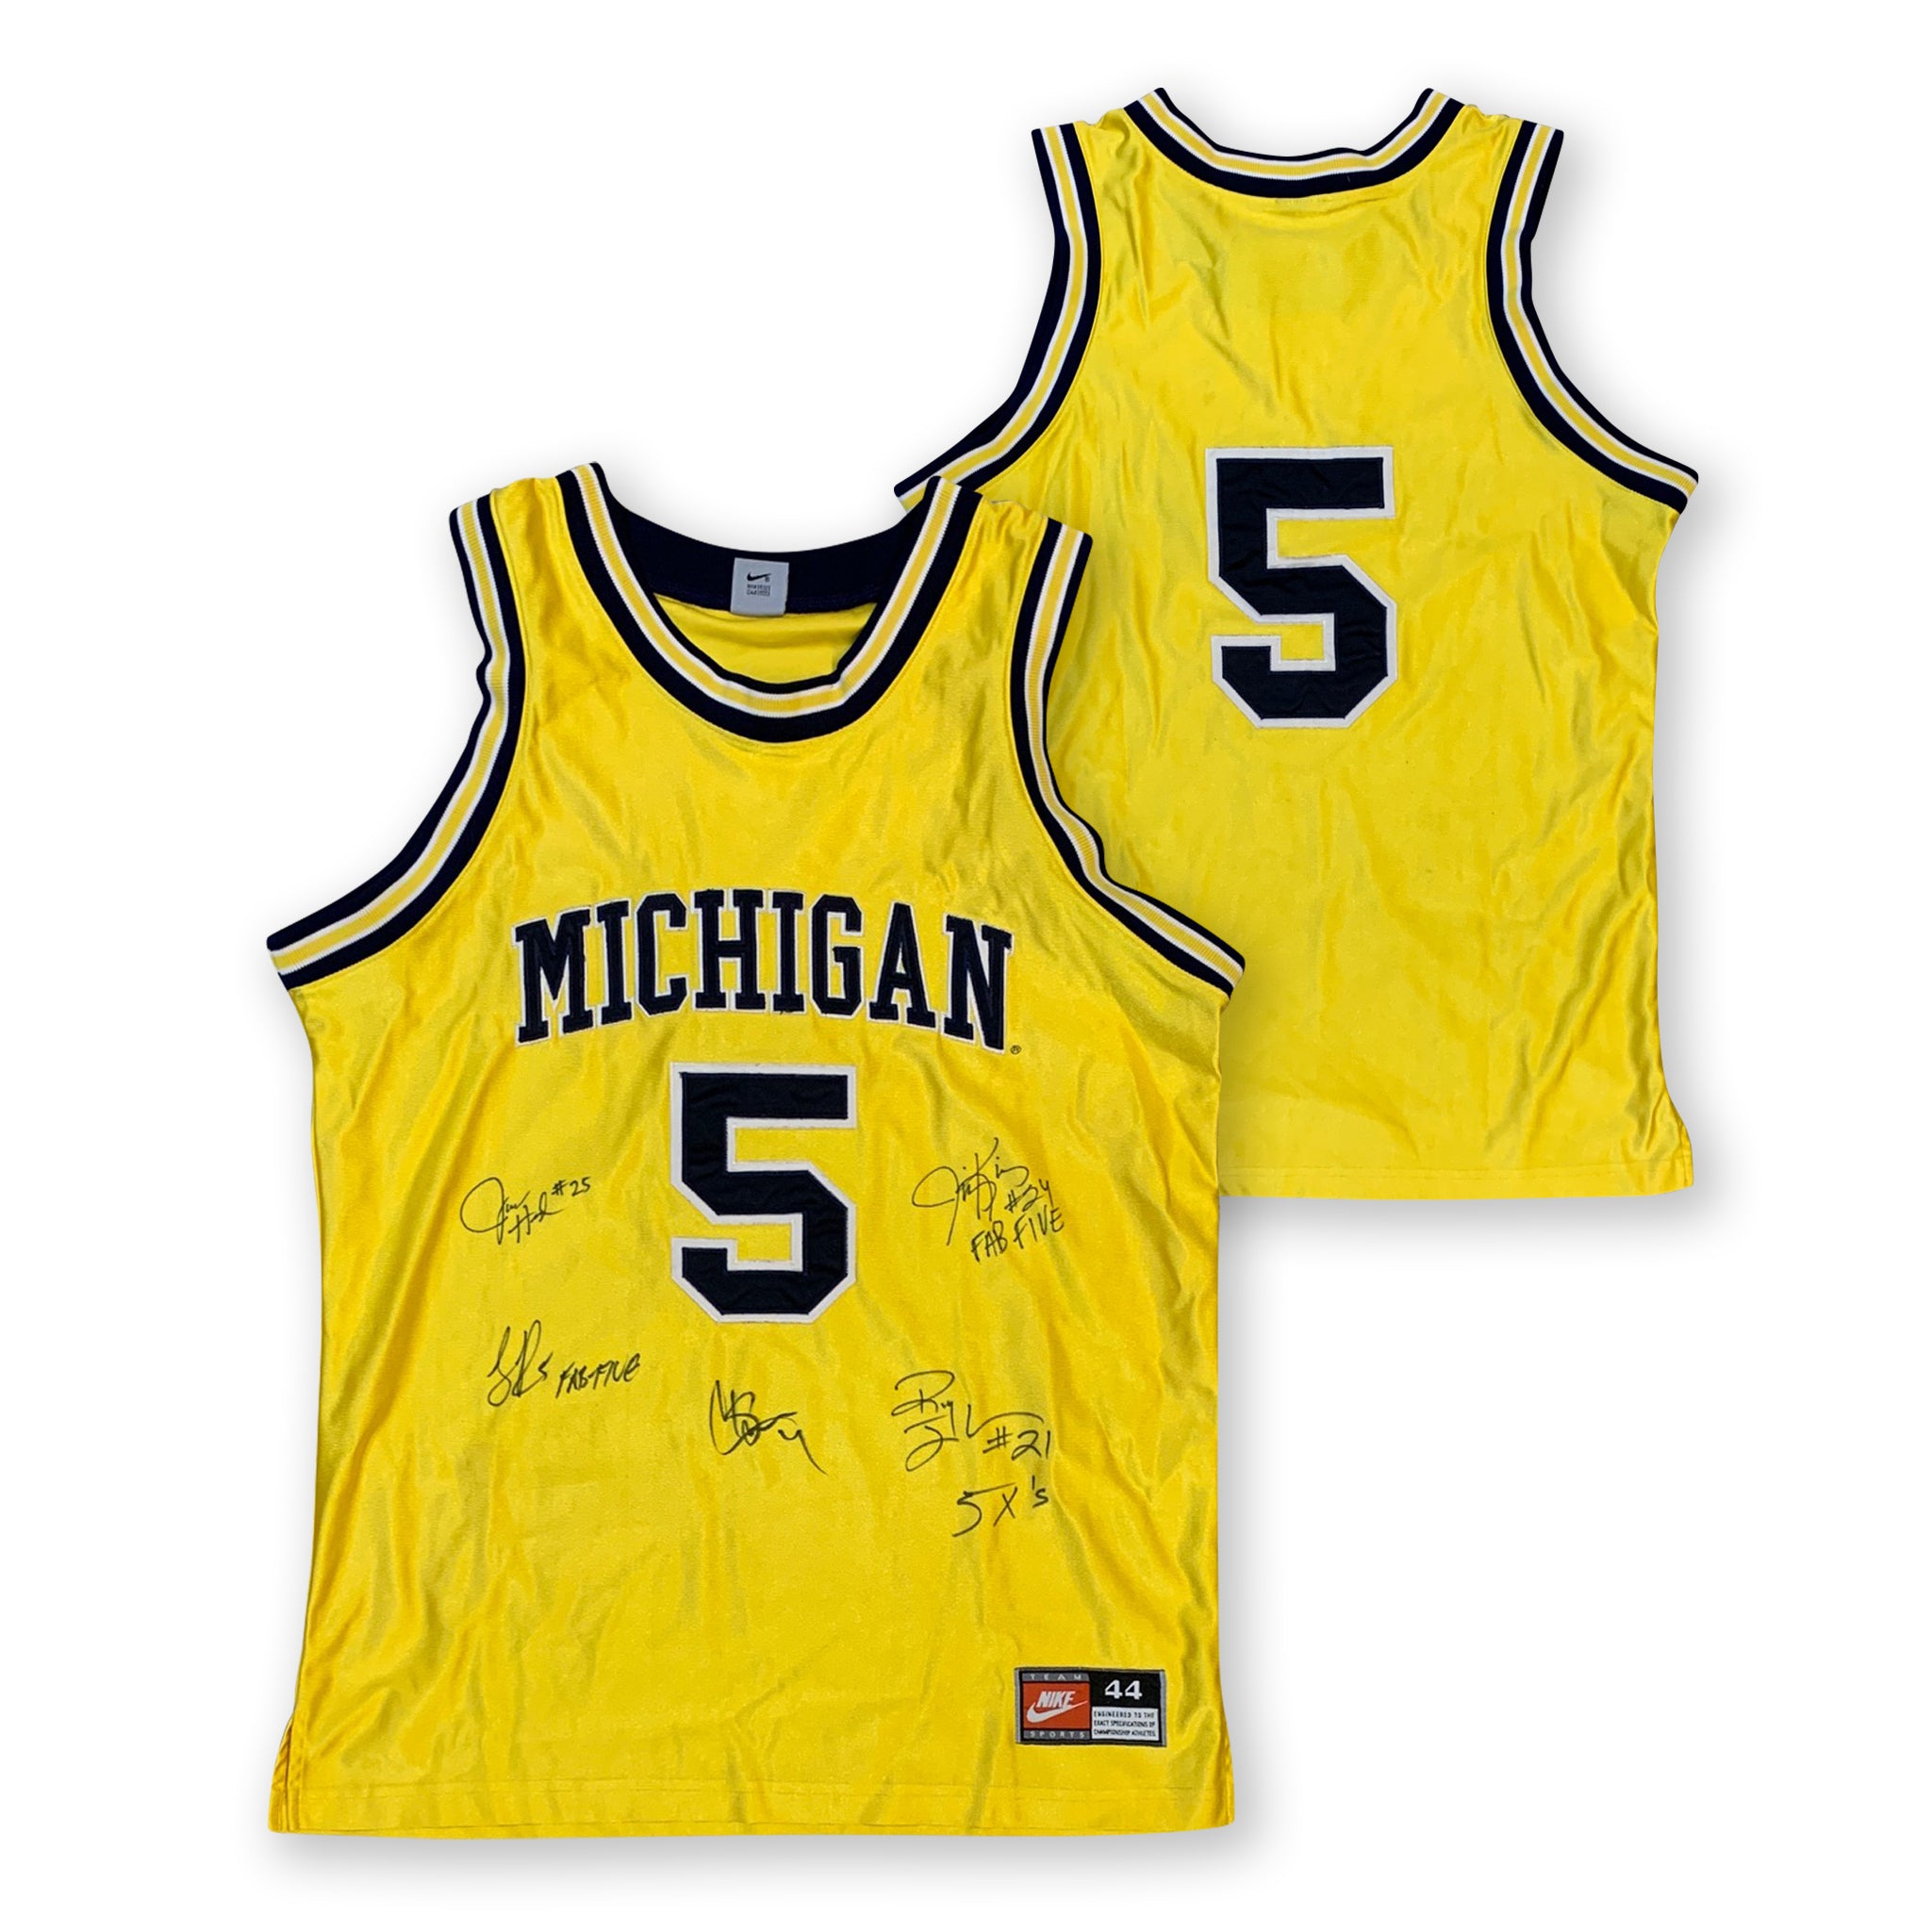 Fab 5 Michigan Wolverines Autographed Nike Signed Basketball